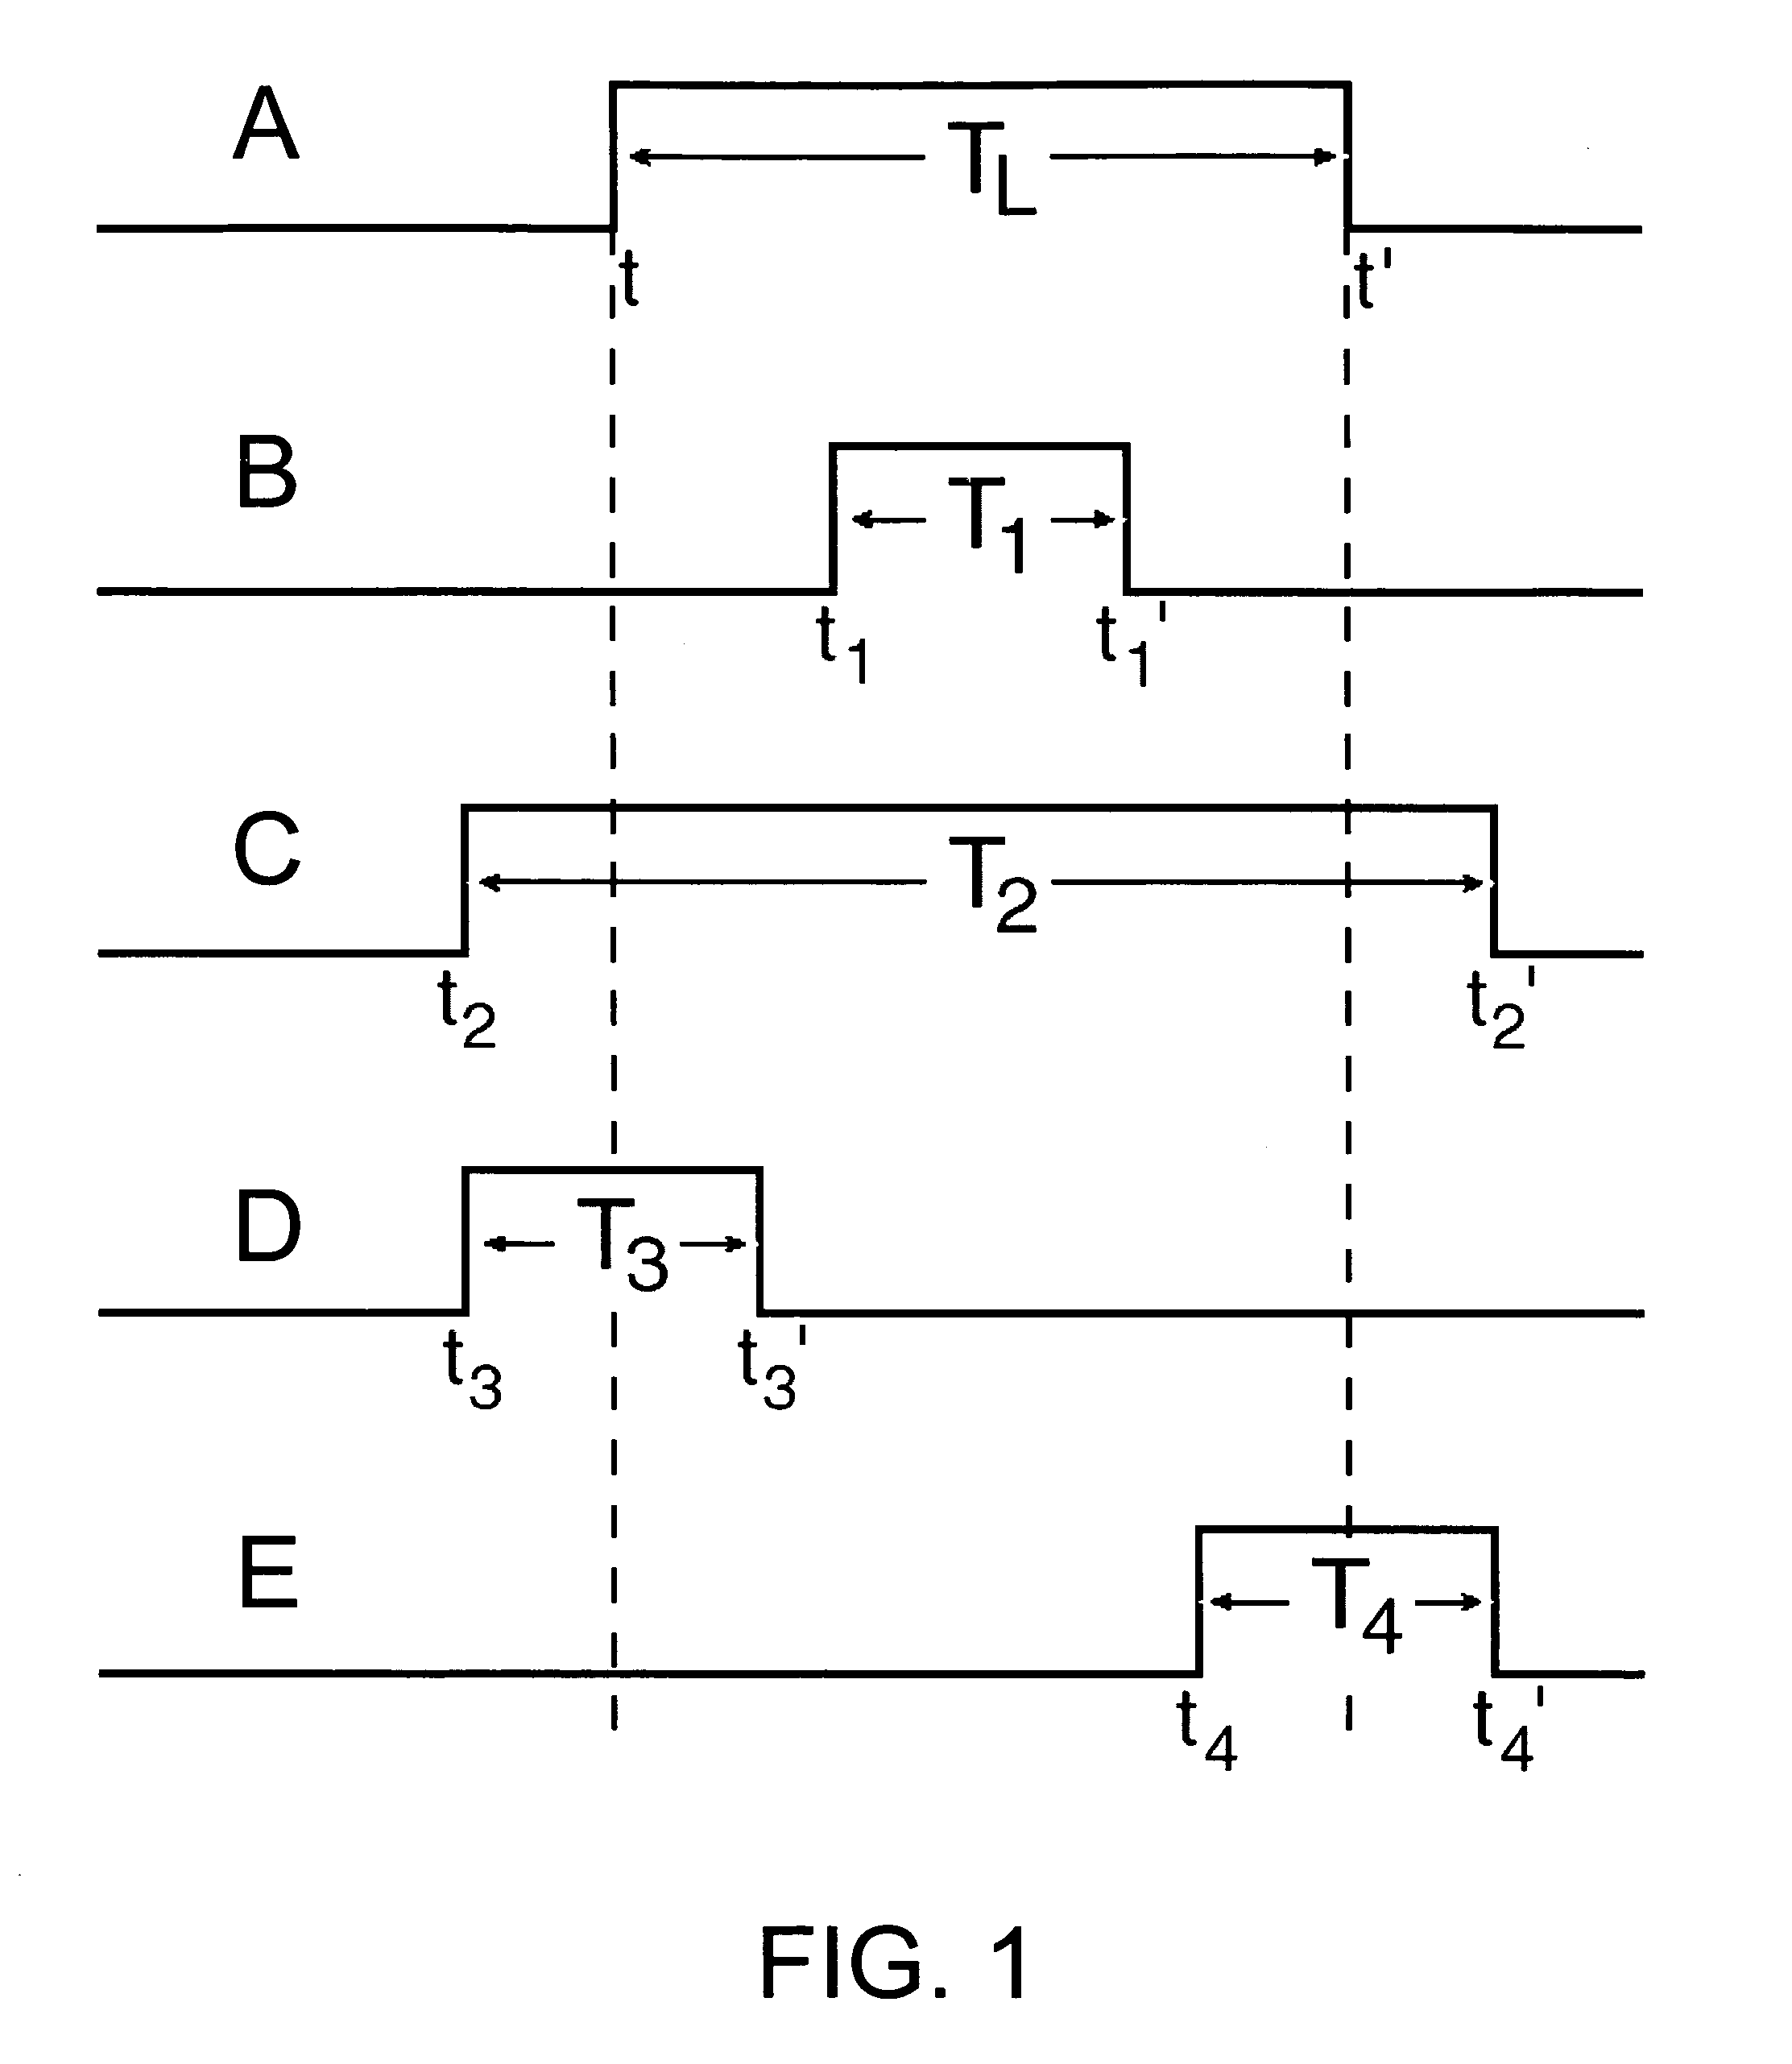 Systems and methods for determining depth using shuttered light pulses